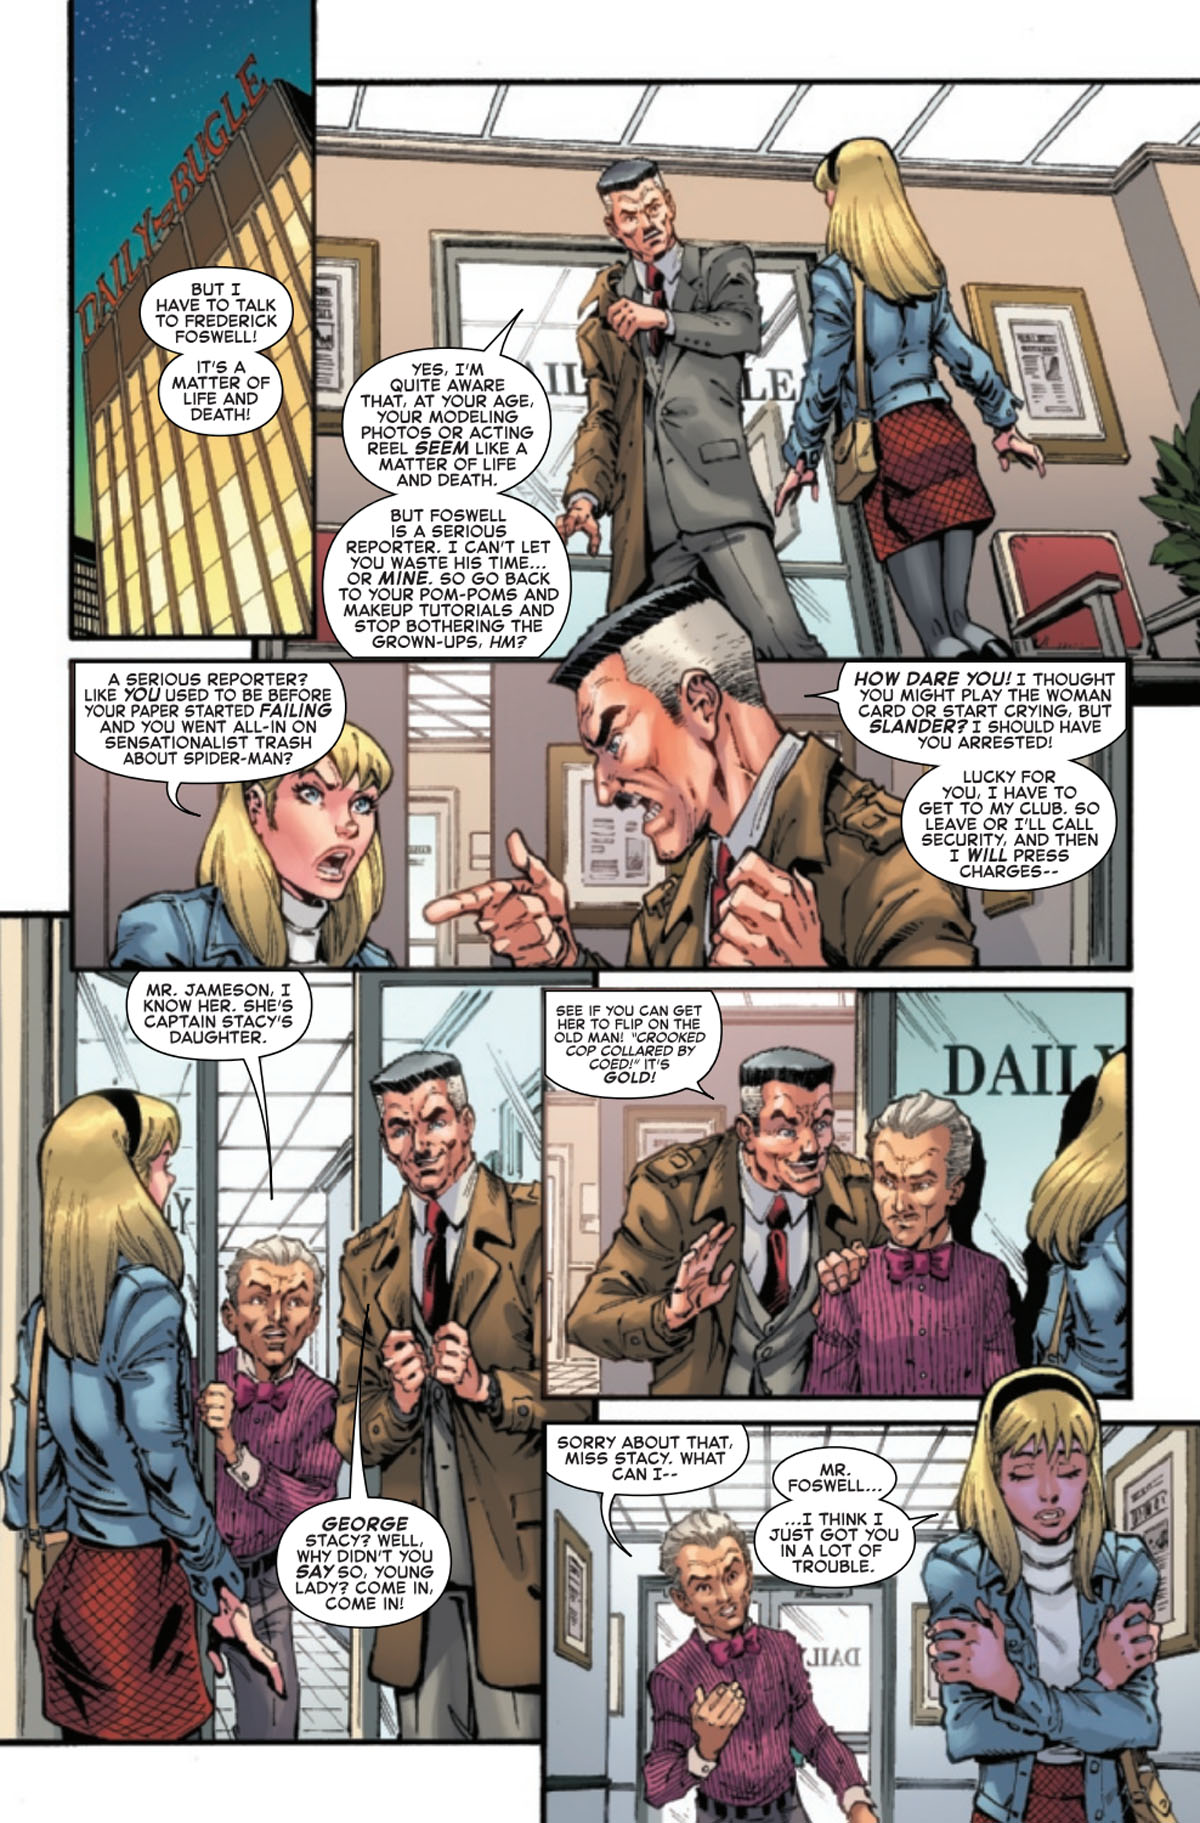 Giant-Size Gwen Stacy #1 preview page 4